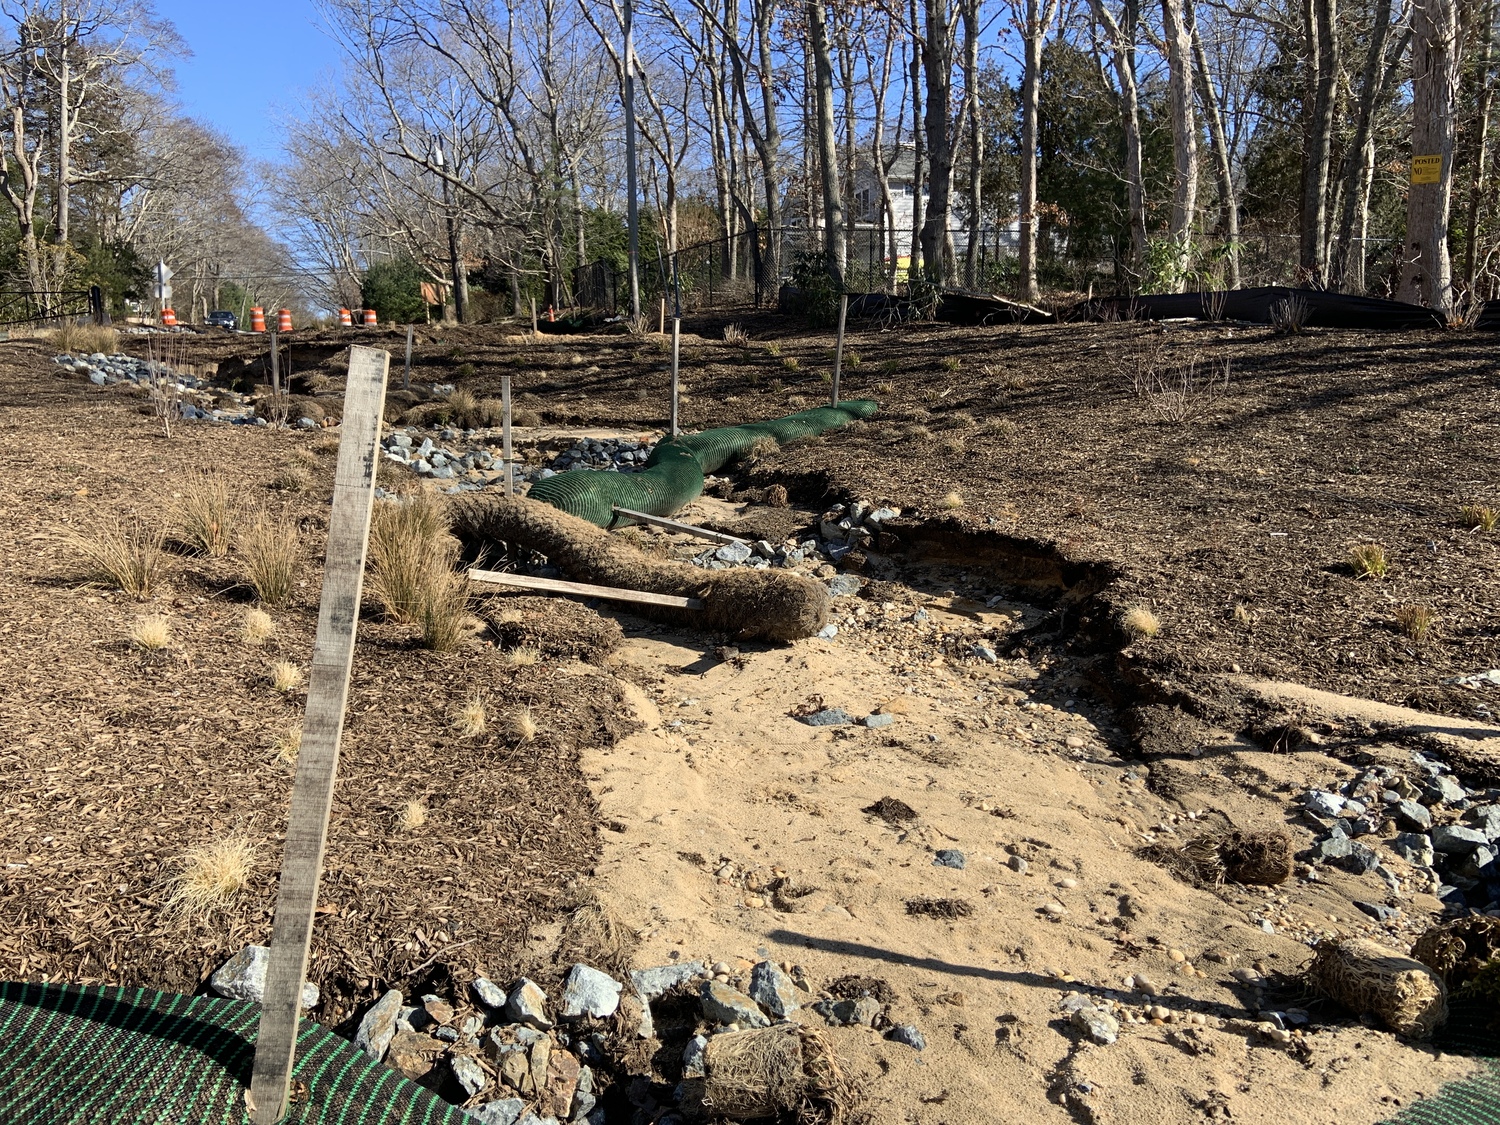 Heavy rains overwhelmed the naturalized shoreline that was constructed last September at the foot of Round Pond Lane in Sag Harbor. STEPHEN J. KOTZ